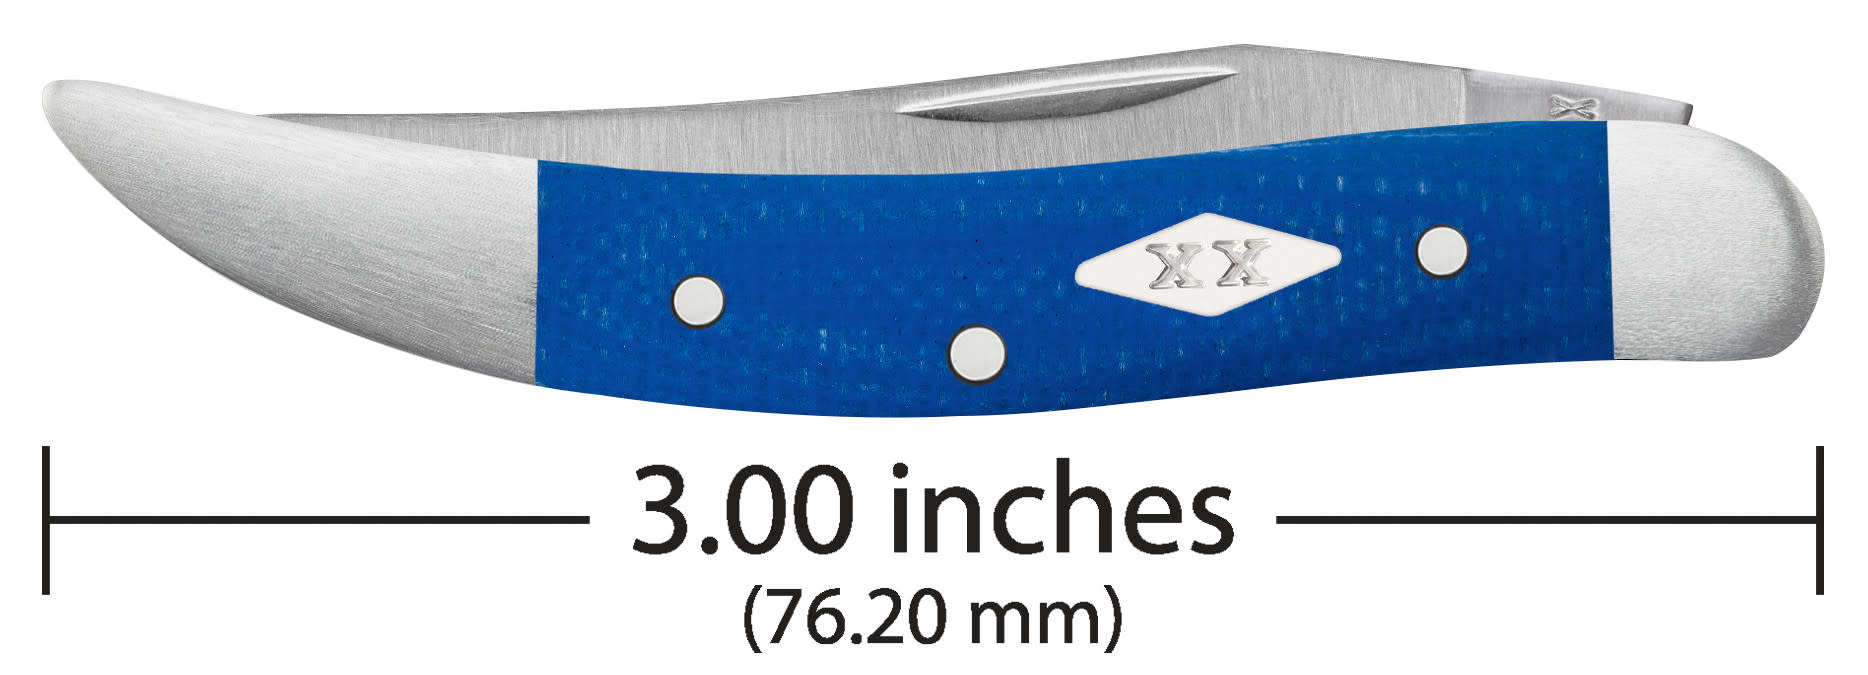 Smooth Blue G-10  Small Texas Toothpick  Knife Dimensions